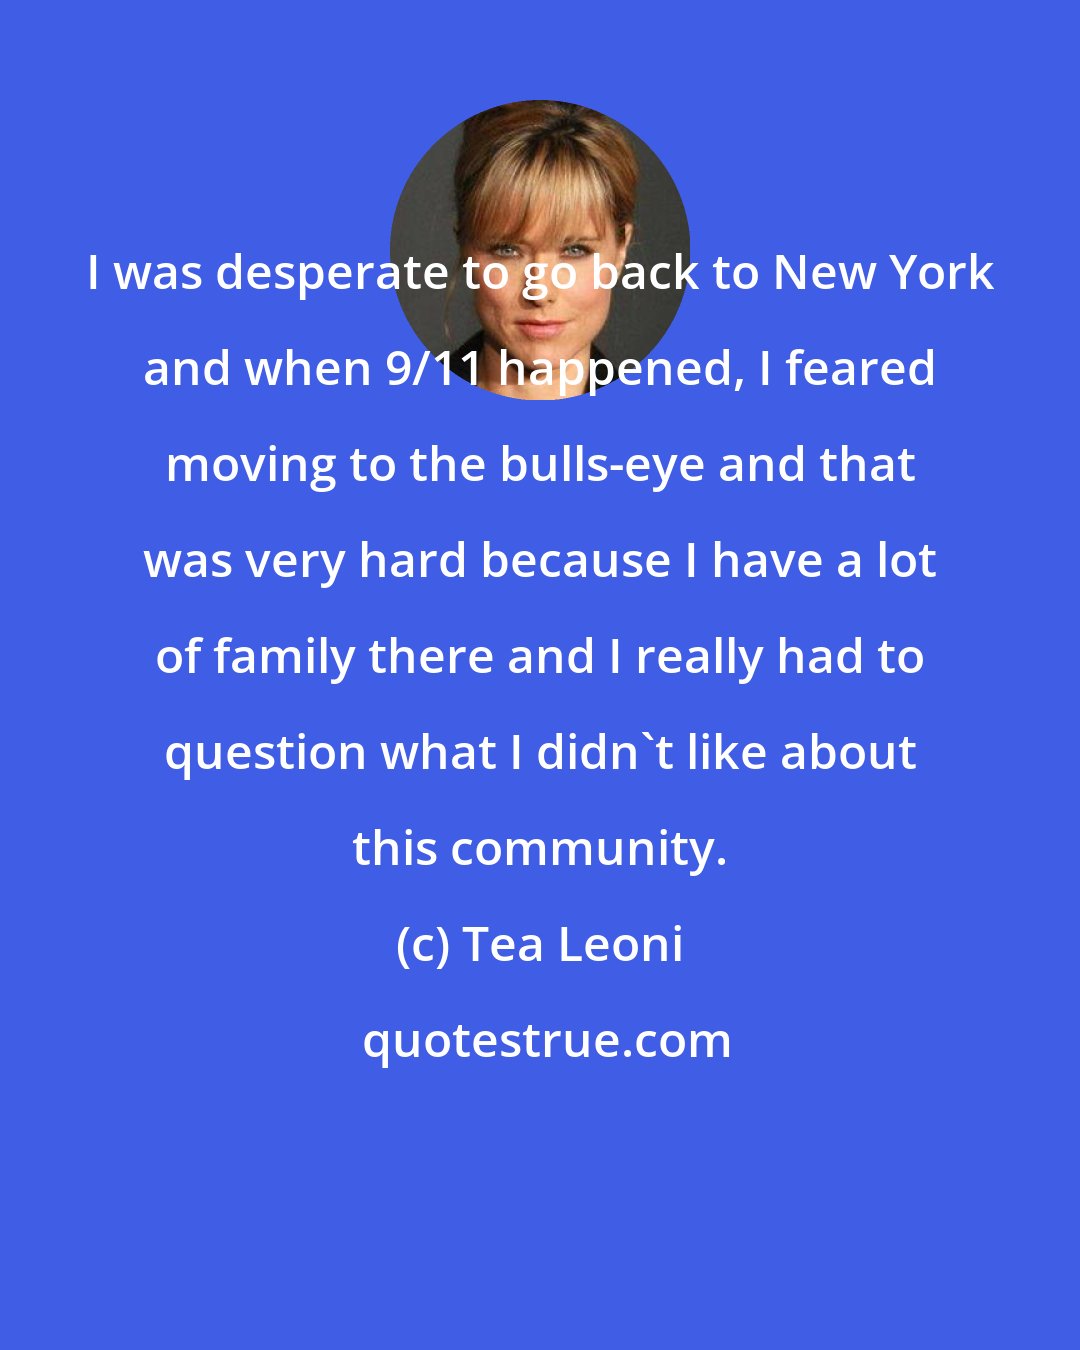 Tea Leoni: I was desperate to go back to New York and when 9/11 happened, I feared moving to the bulls-eye and that was very hard because I have a lot of family there and I really had to question what I didn't like about this community.